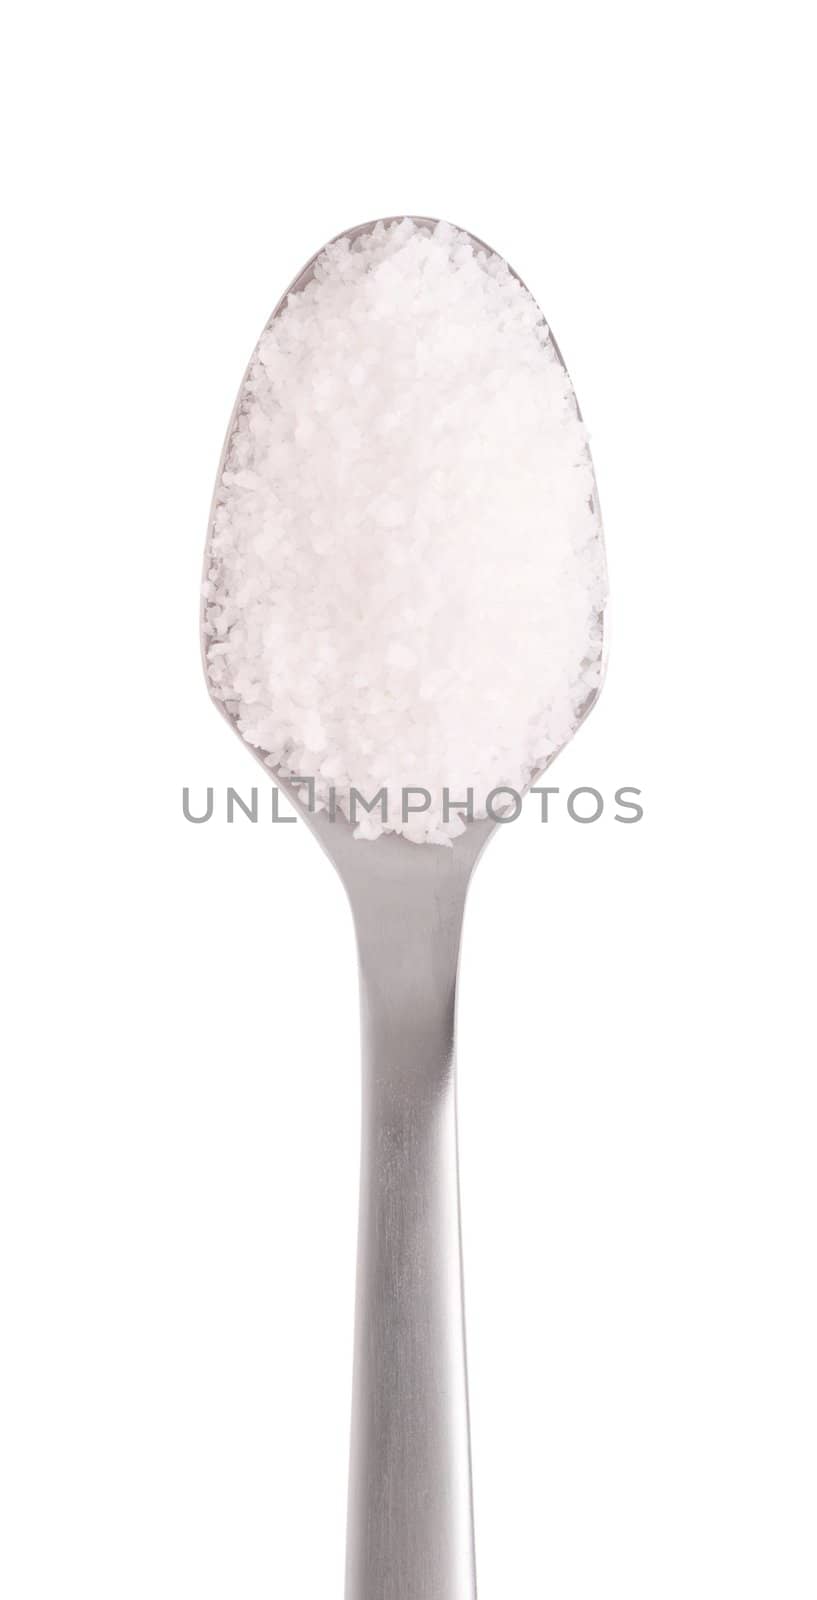 salt spice on a stainless steel spoon, isolated on white background